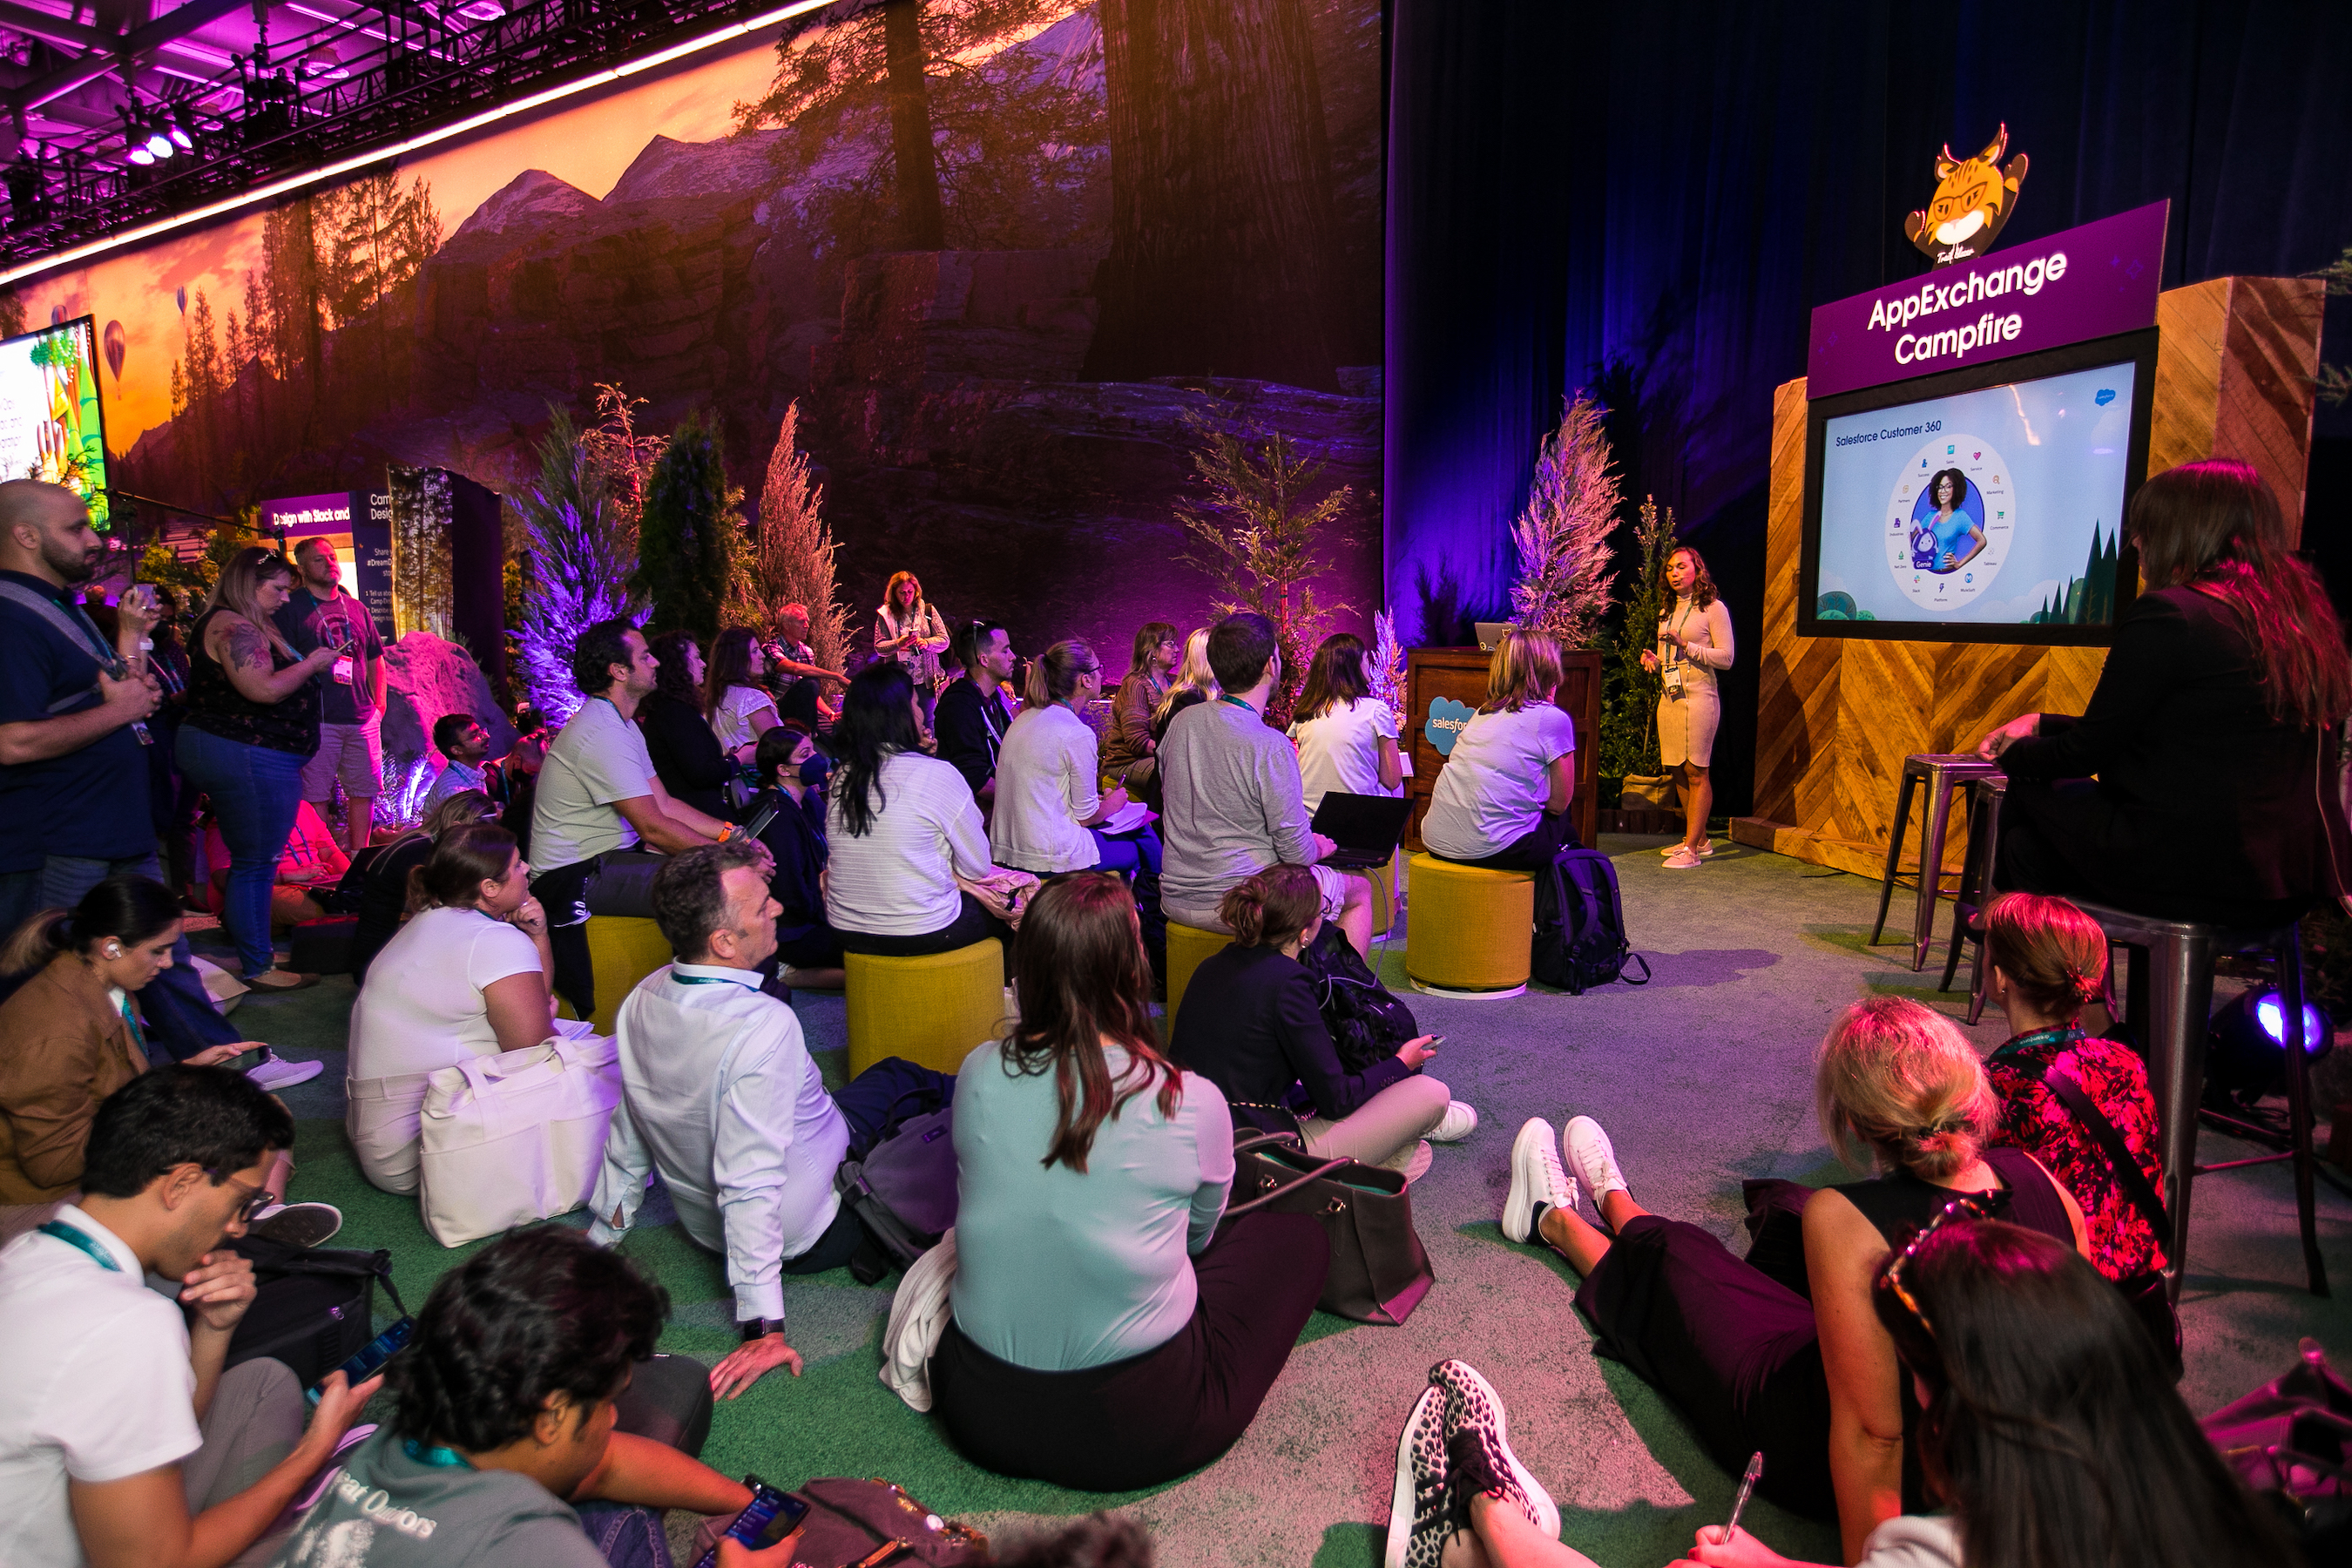 Attendees of Dreamforce 22' sit and listen to a Salesforce employee discuss AppExchange at an event. 